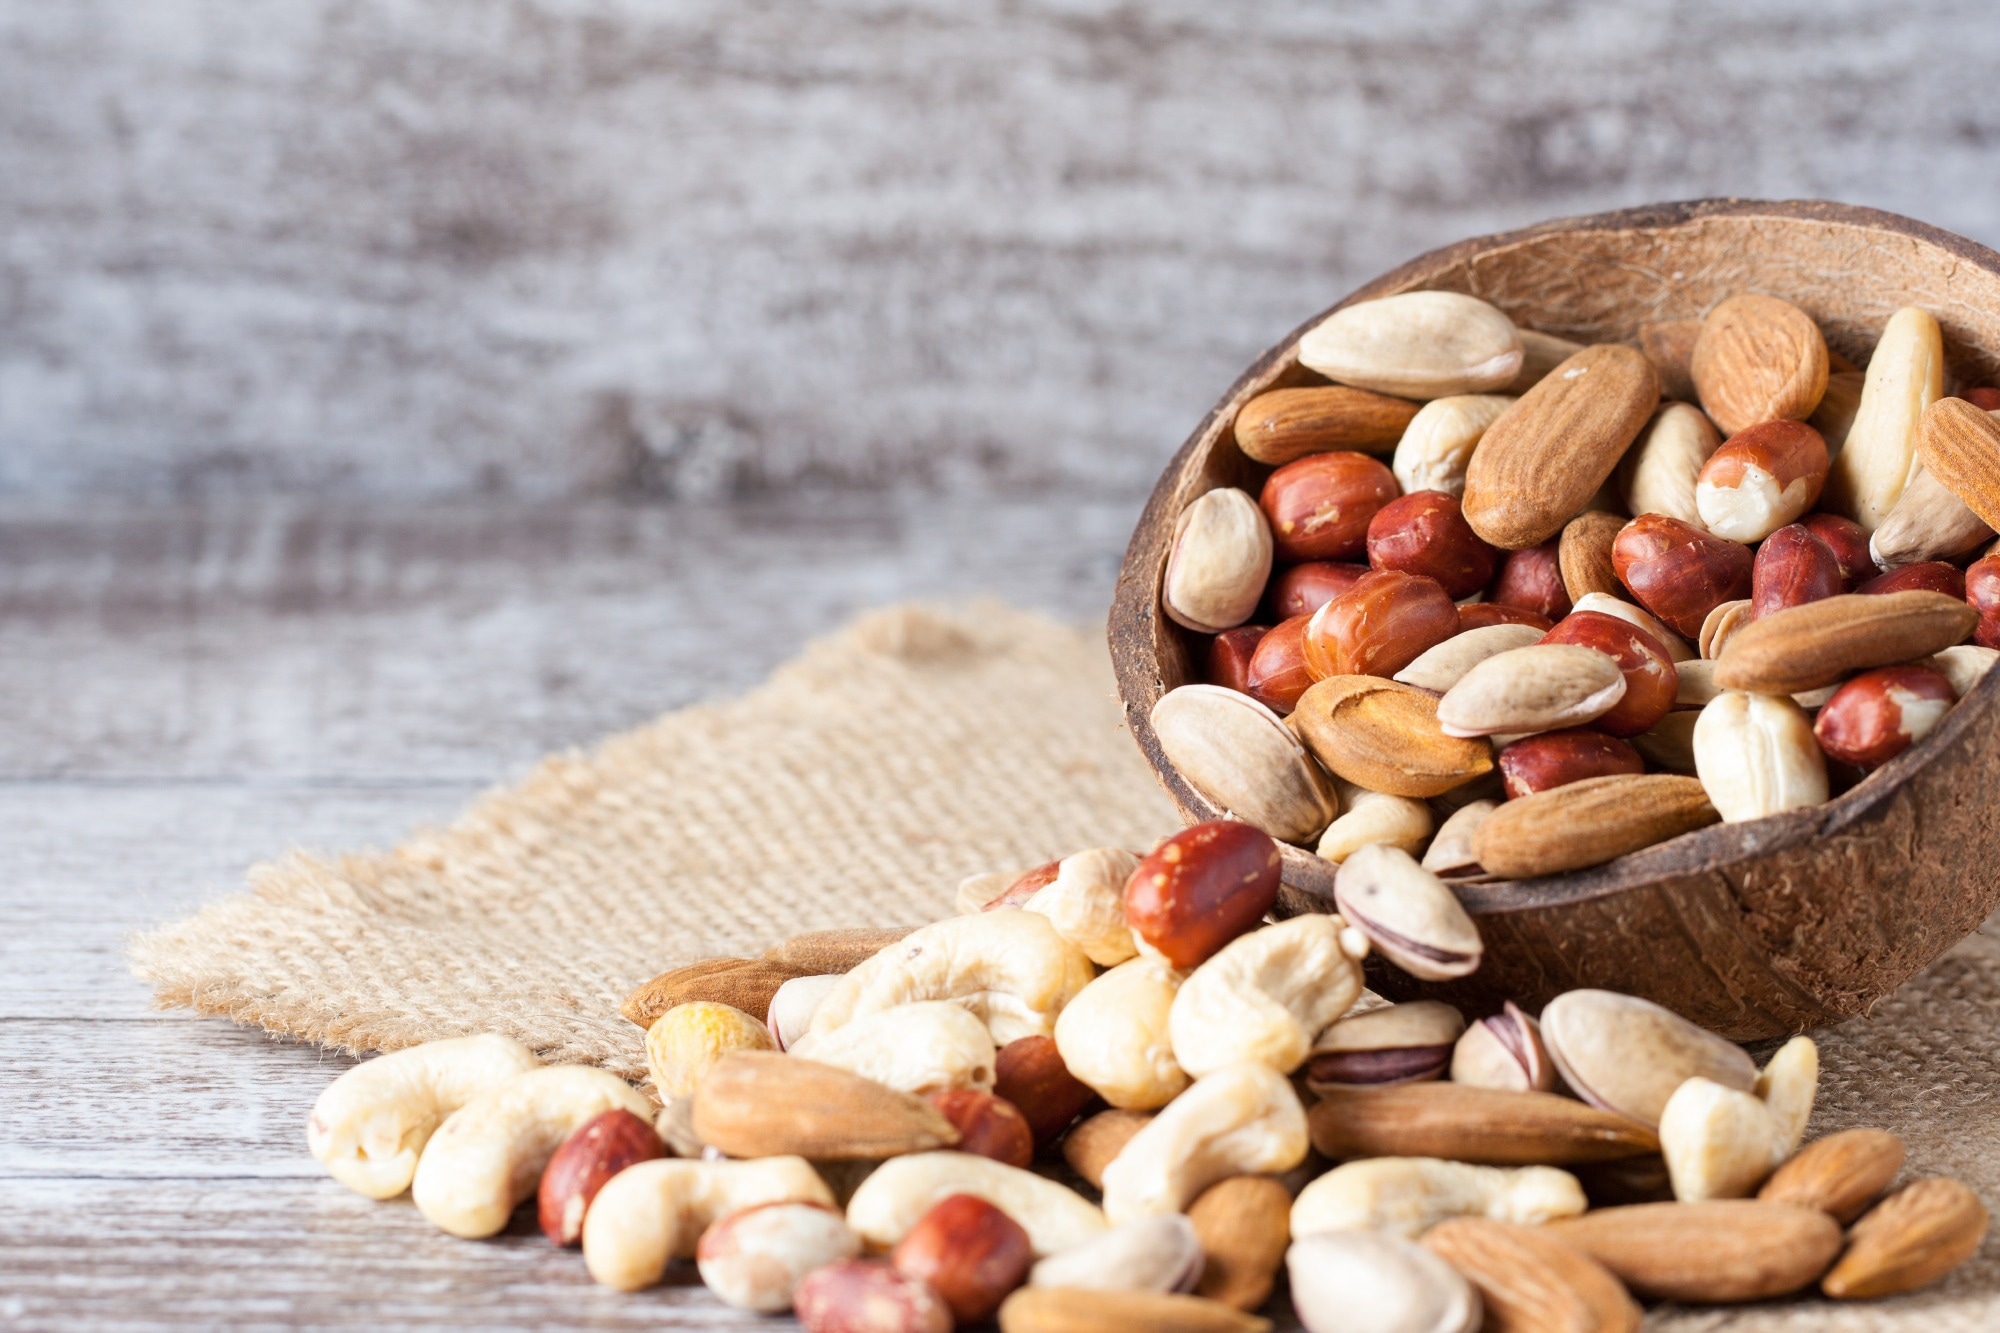 Study: Higher versus lower nut consumption and changes in cognitive performance over two years in a population at risk of cognitive decline: a cohort study. Image Credit: CreatoraLab / Shutterstock.com